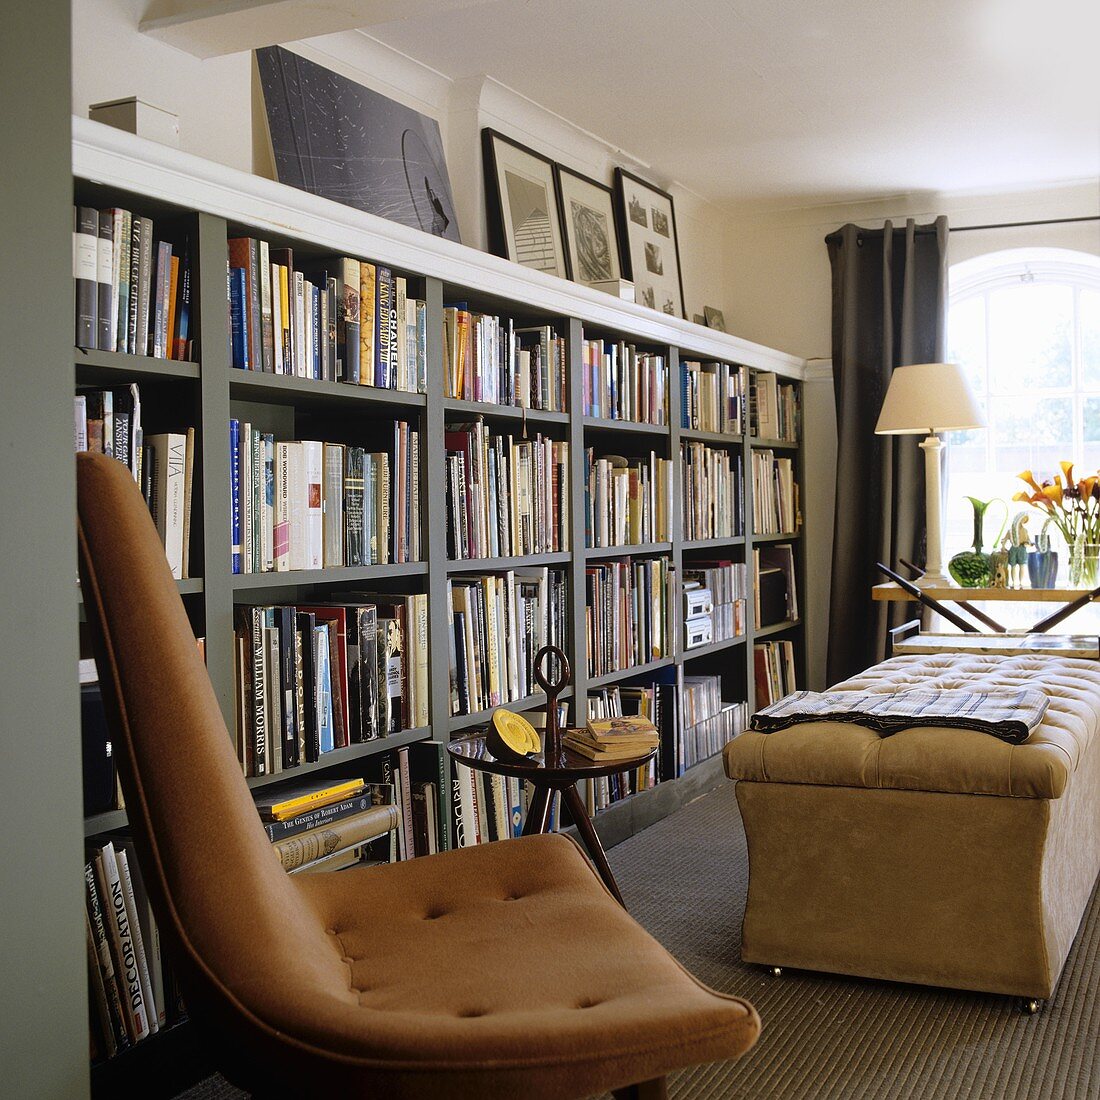 A brown leather chair in front of a grey shelf wall filled with books